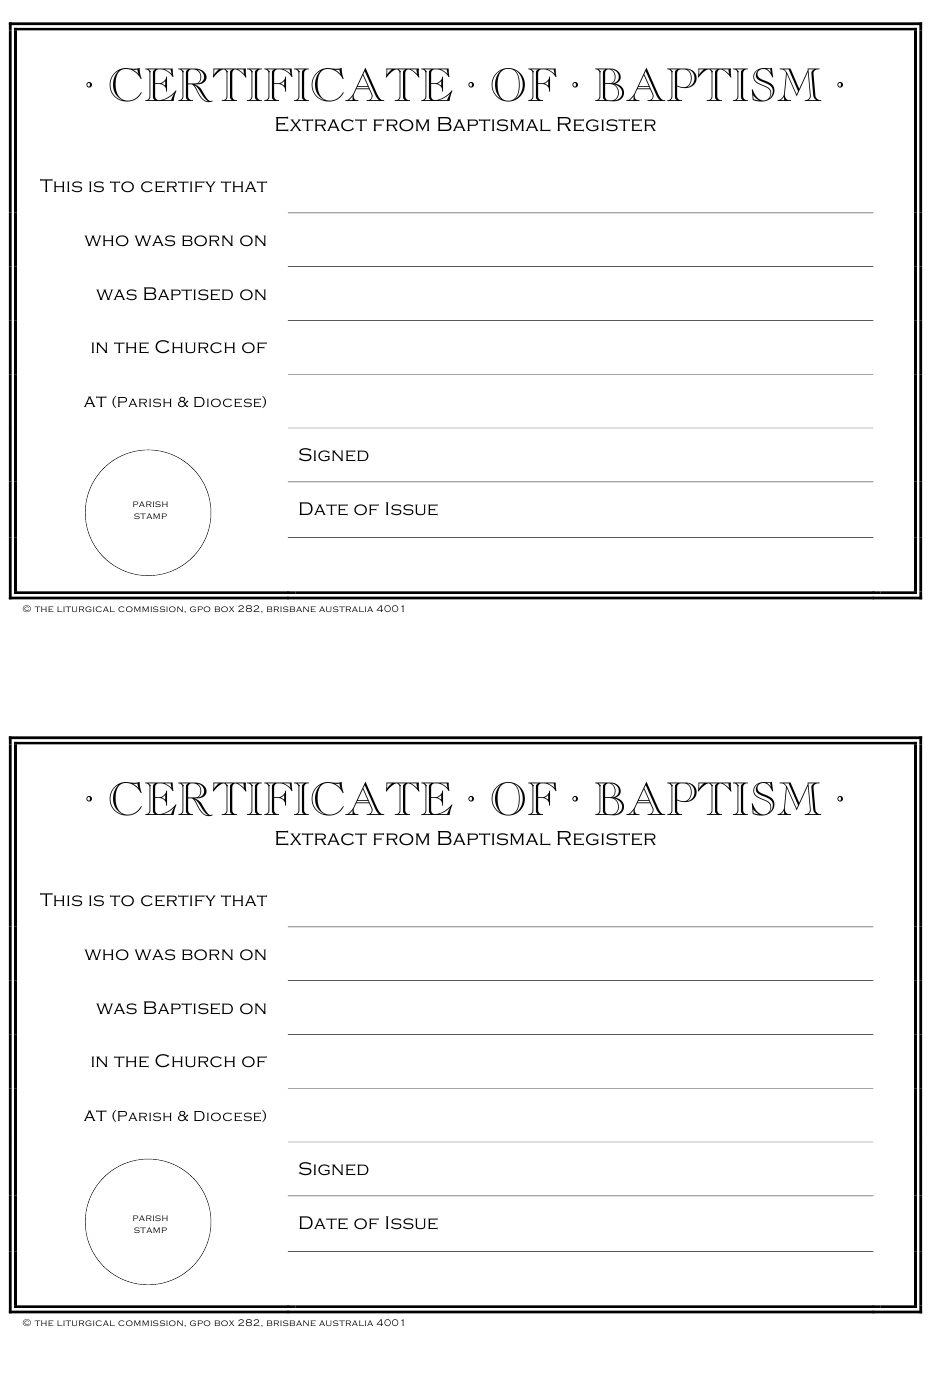 Certificate Of Baptism Template Download Printable Pdf for Baptism Certificate Template Download